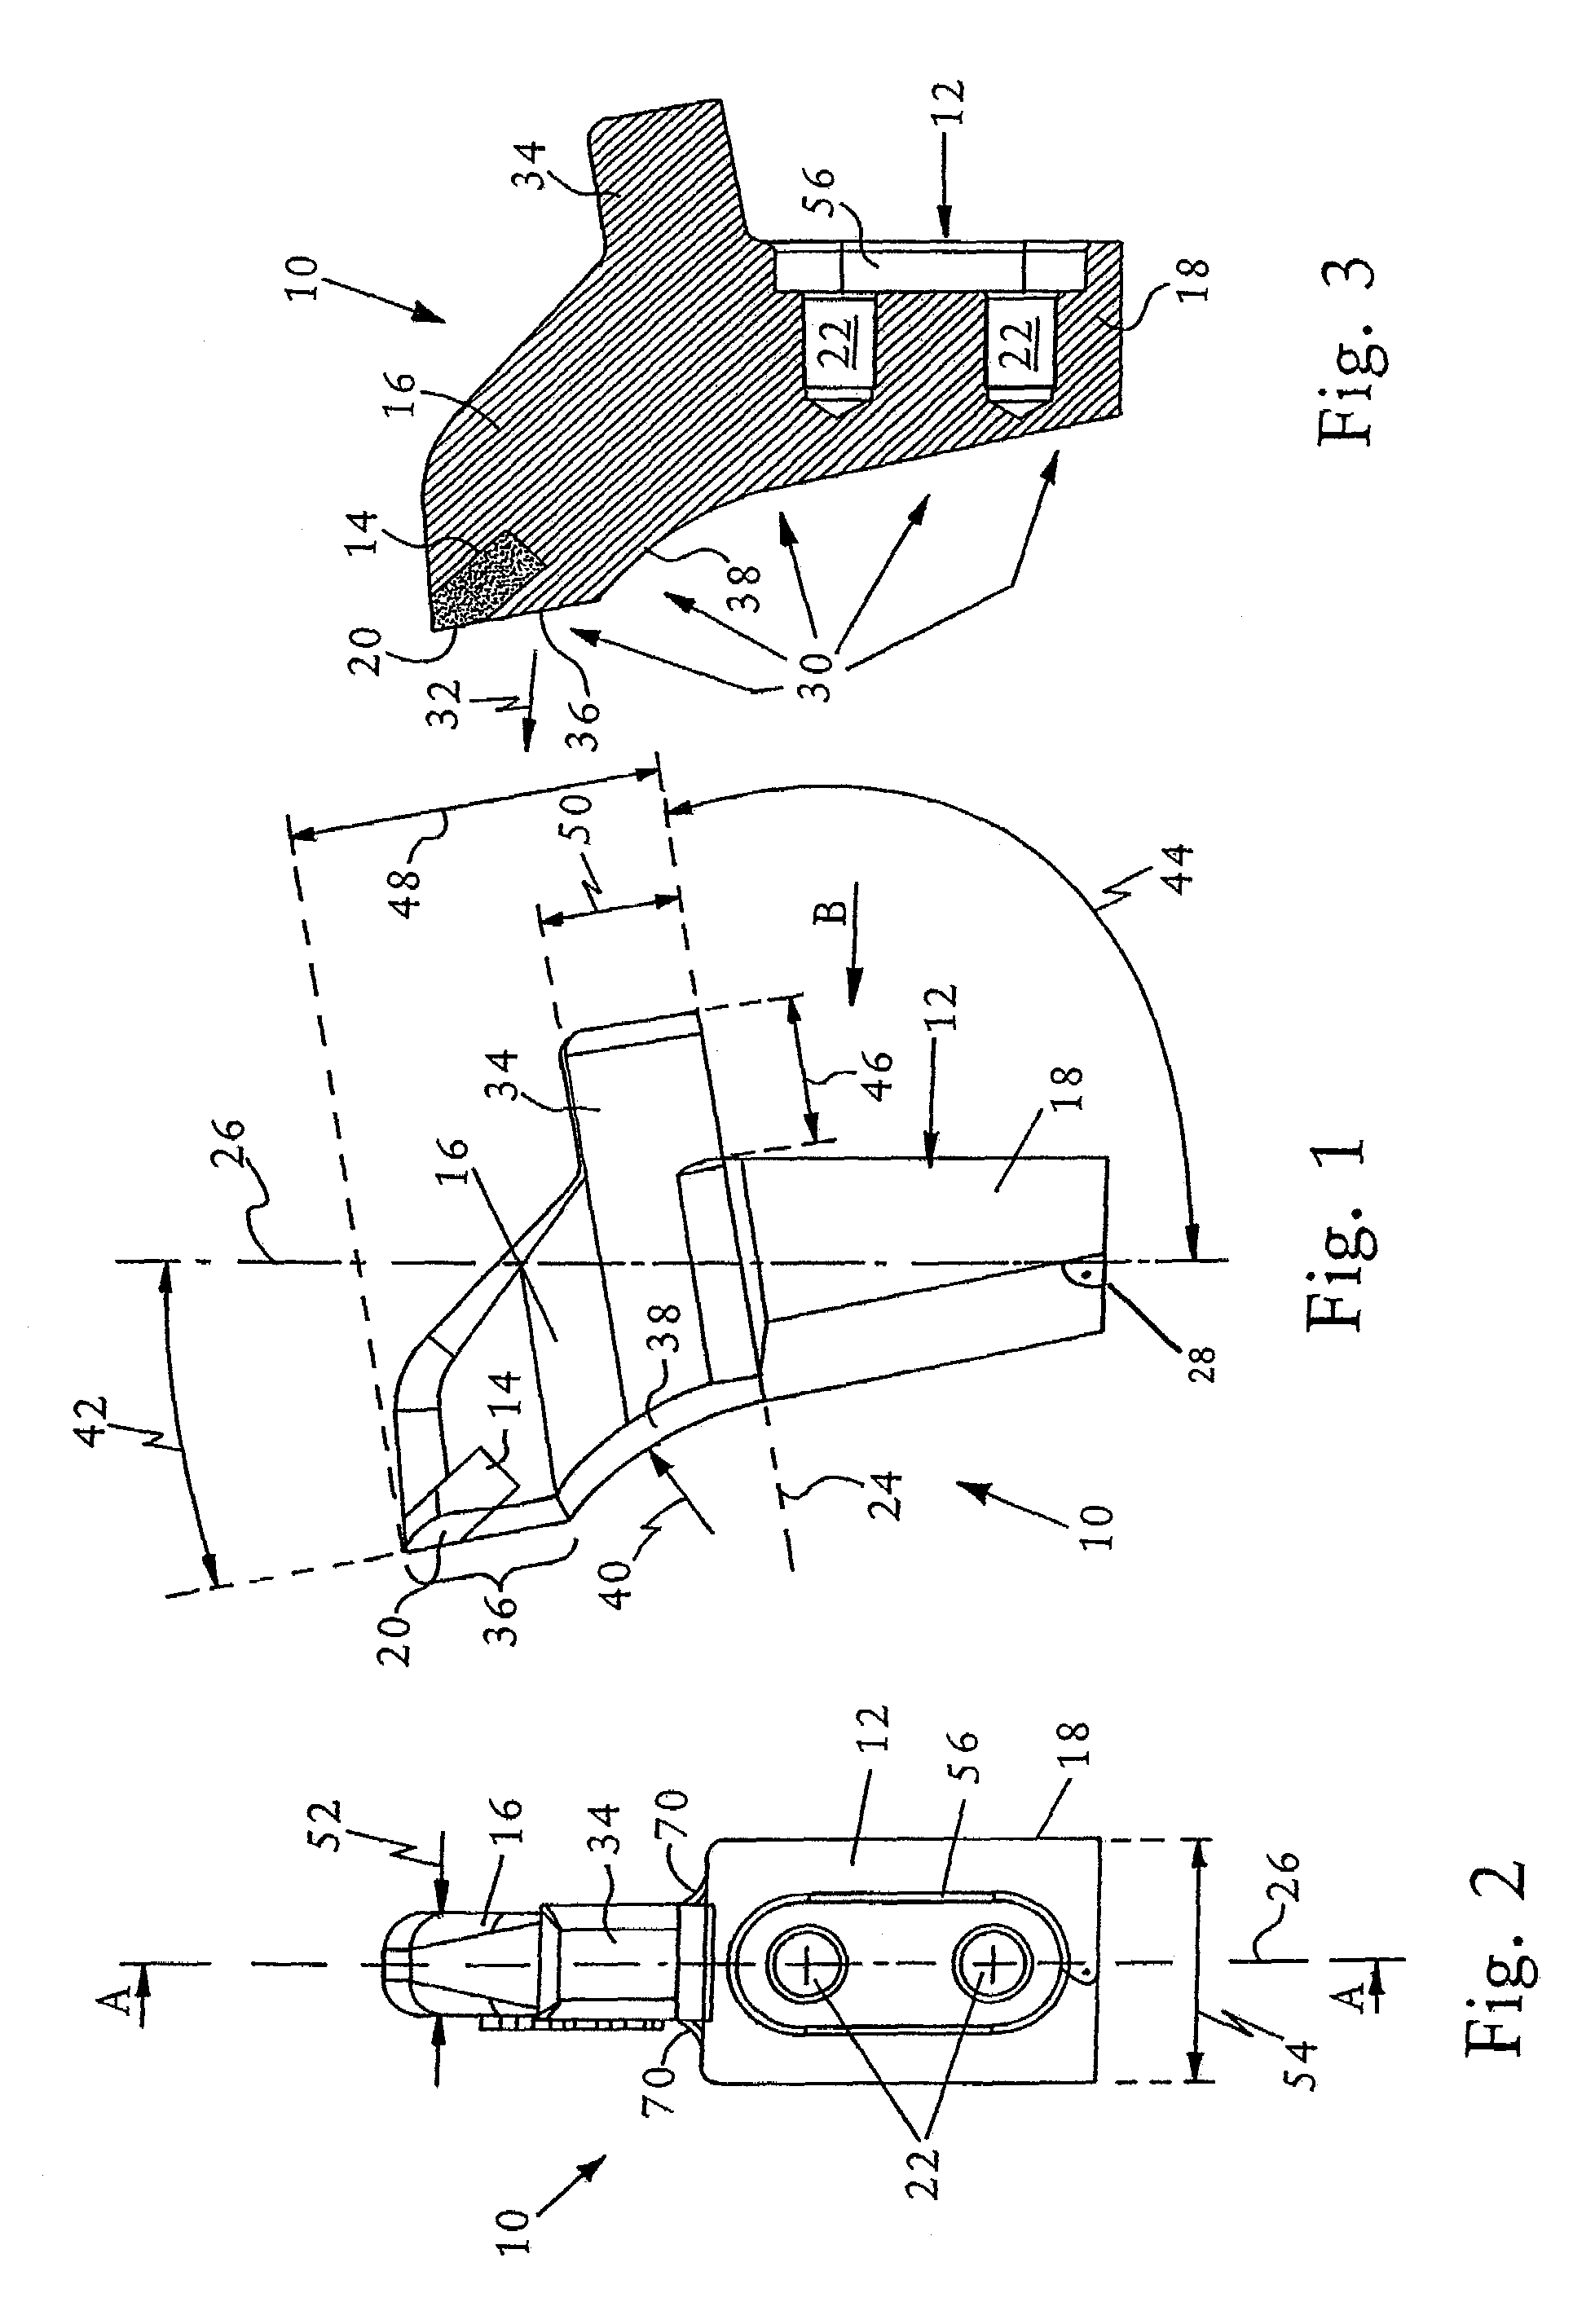 Milling tooth and milling tooth holder for a comminution machine